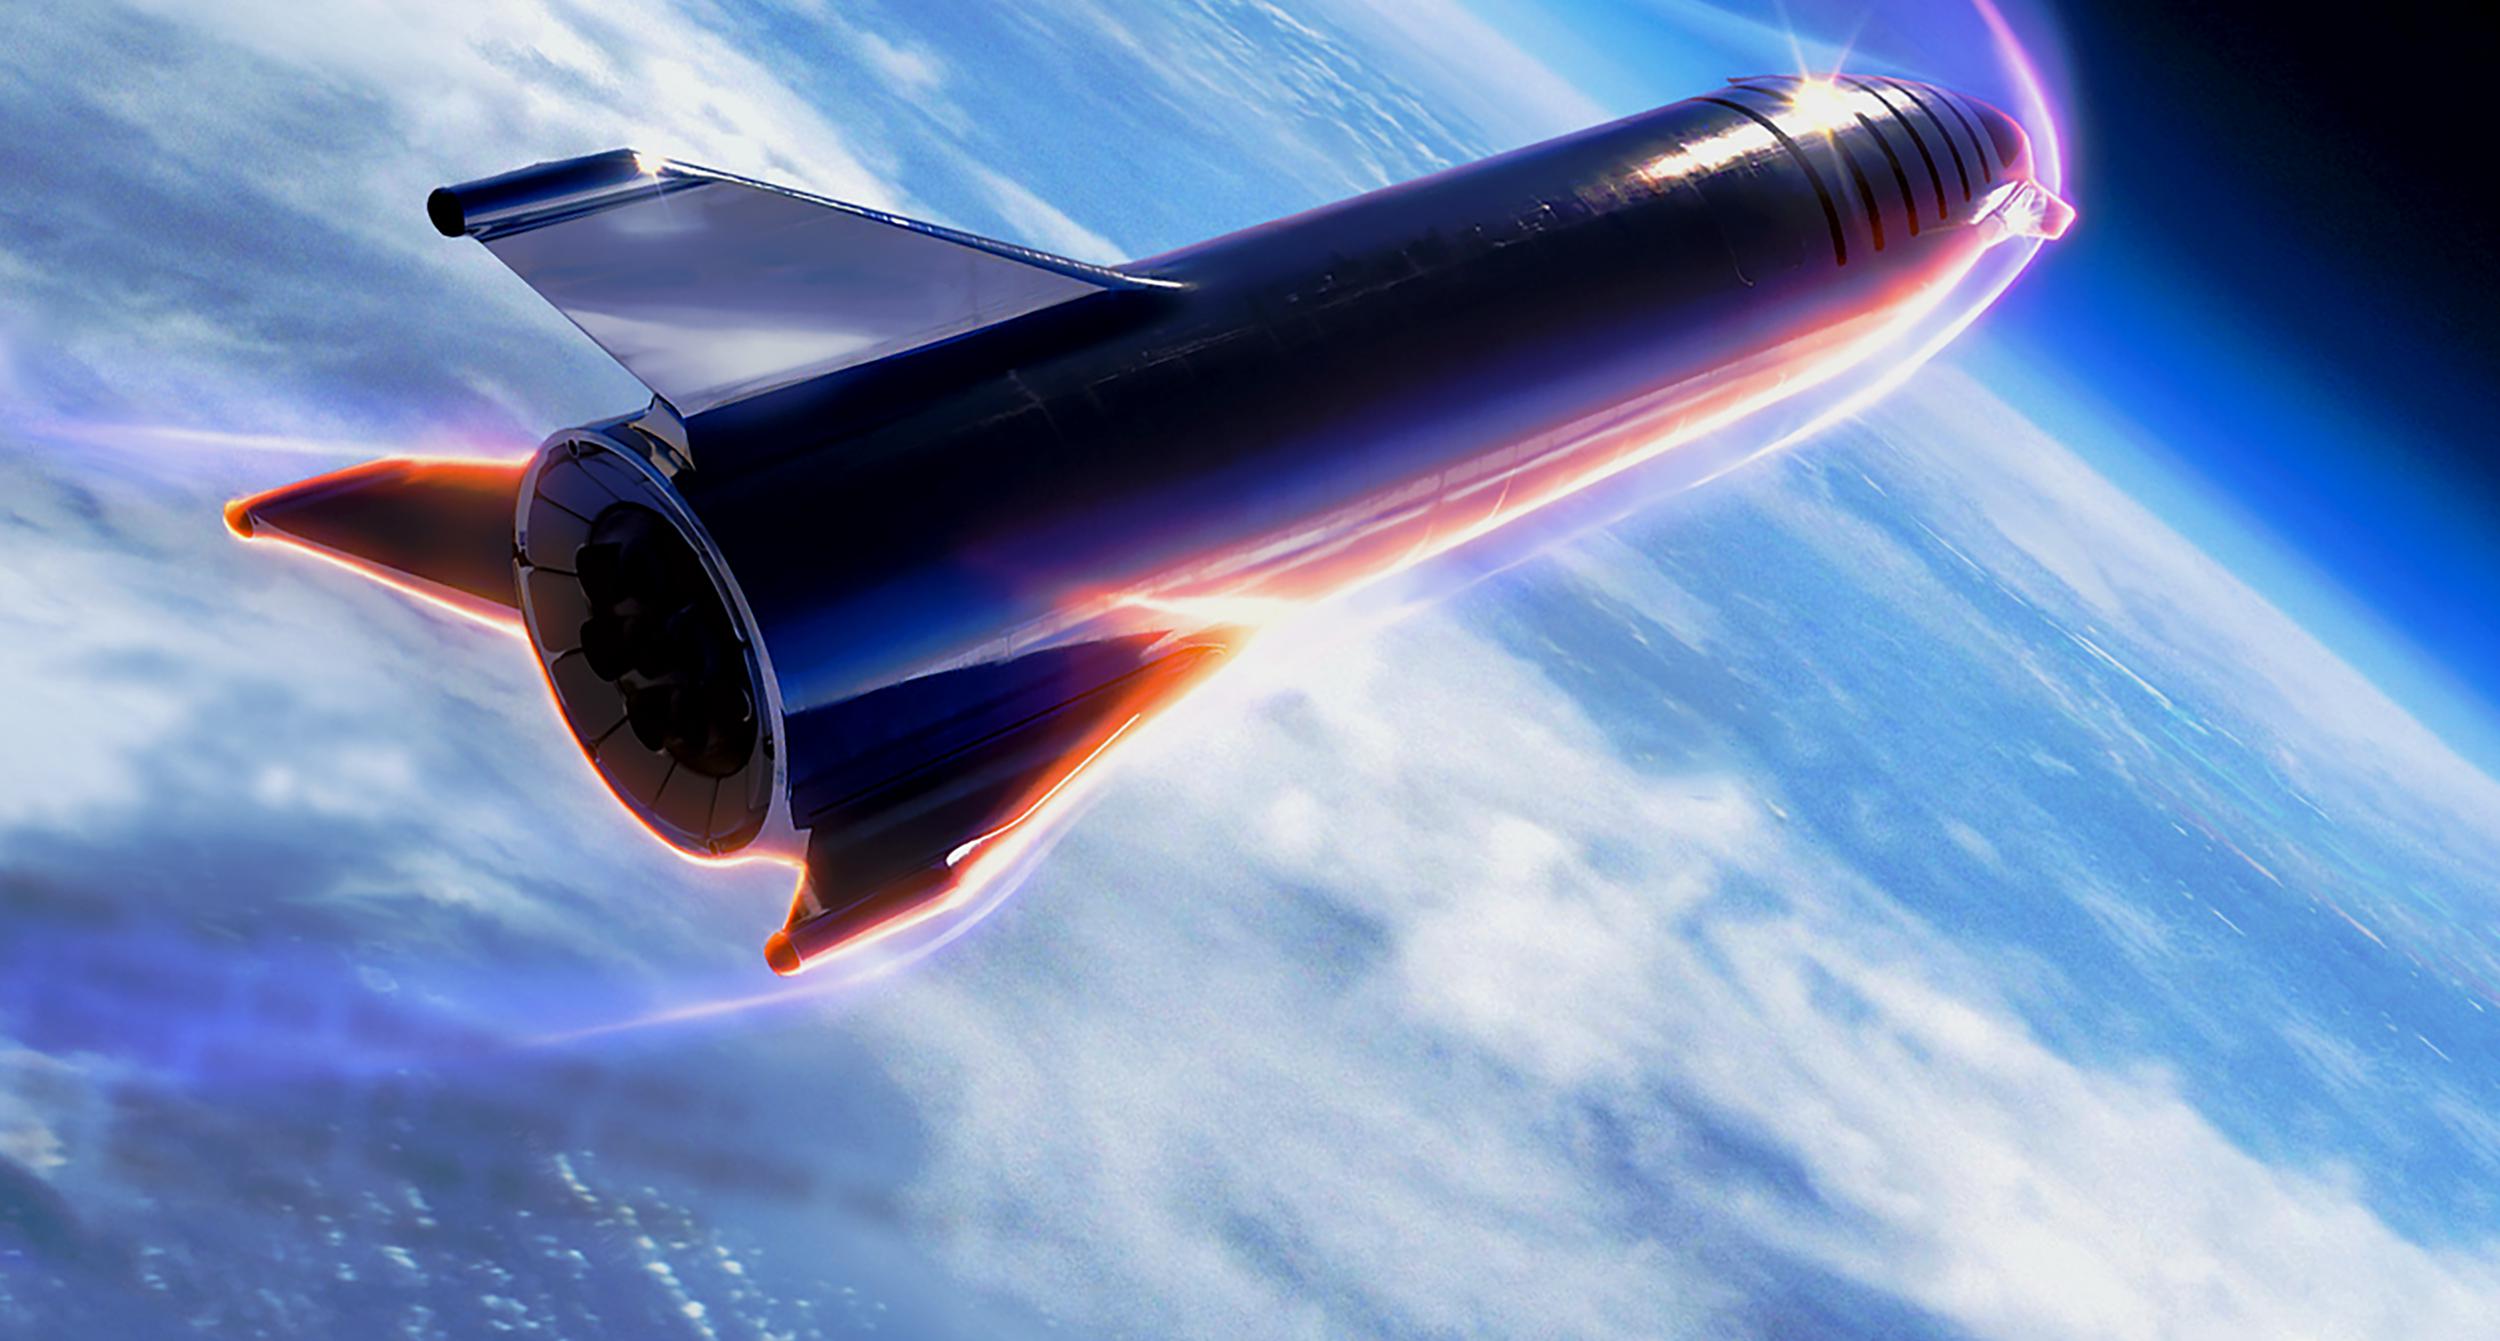 SpaceX's Steel Starship Glows During Earth Reentry In First High Quality Render